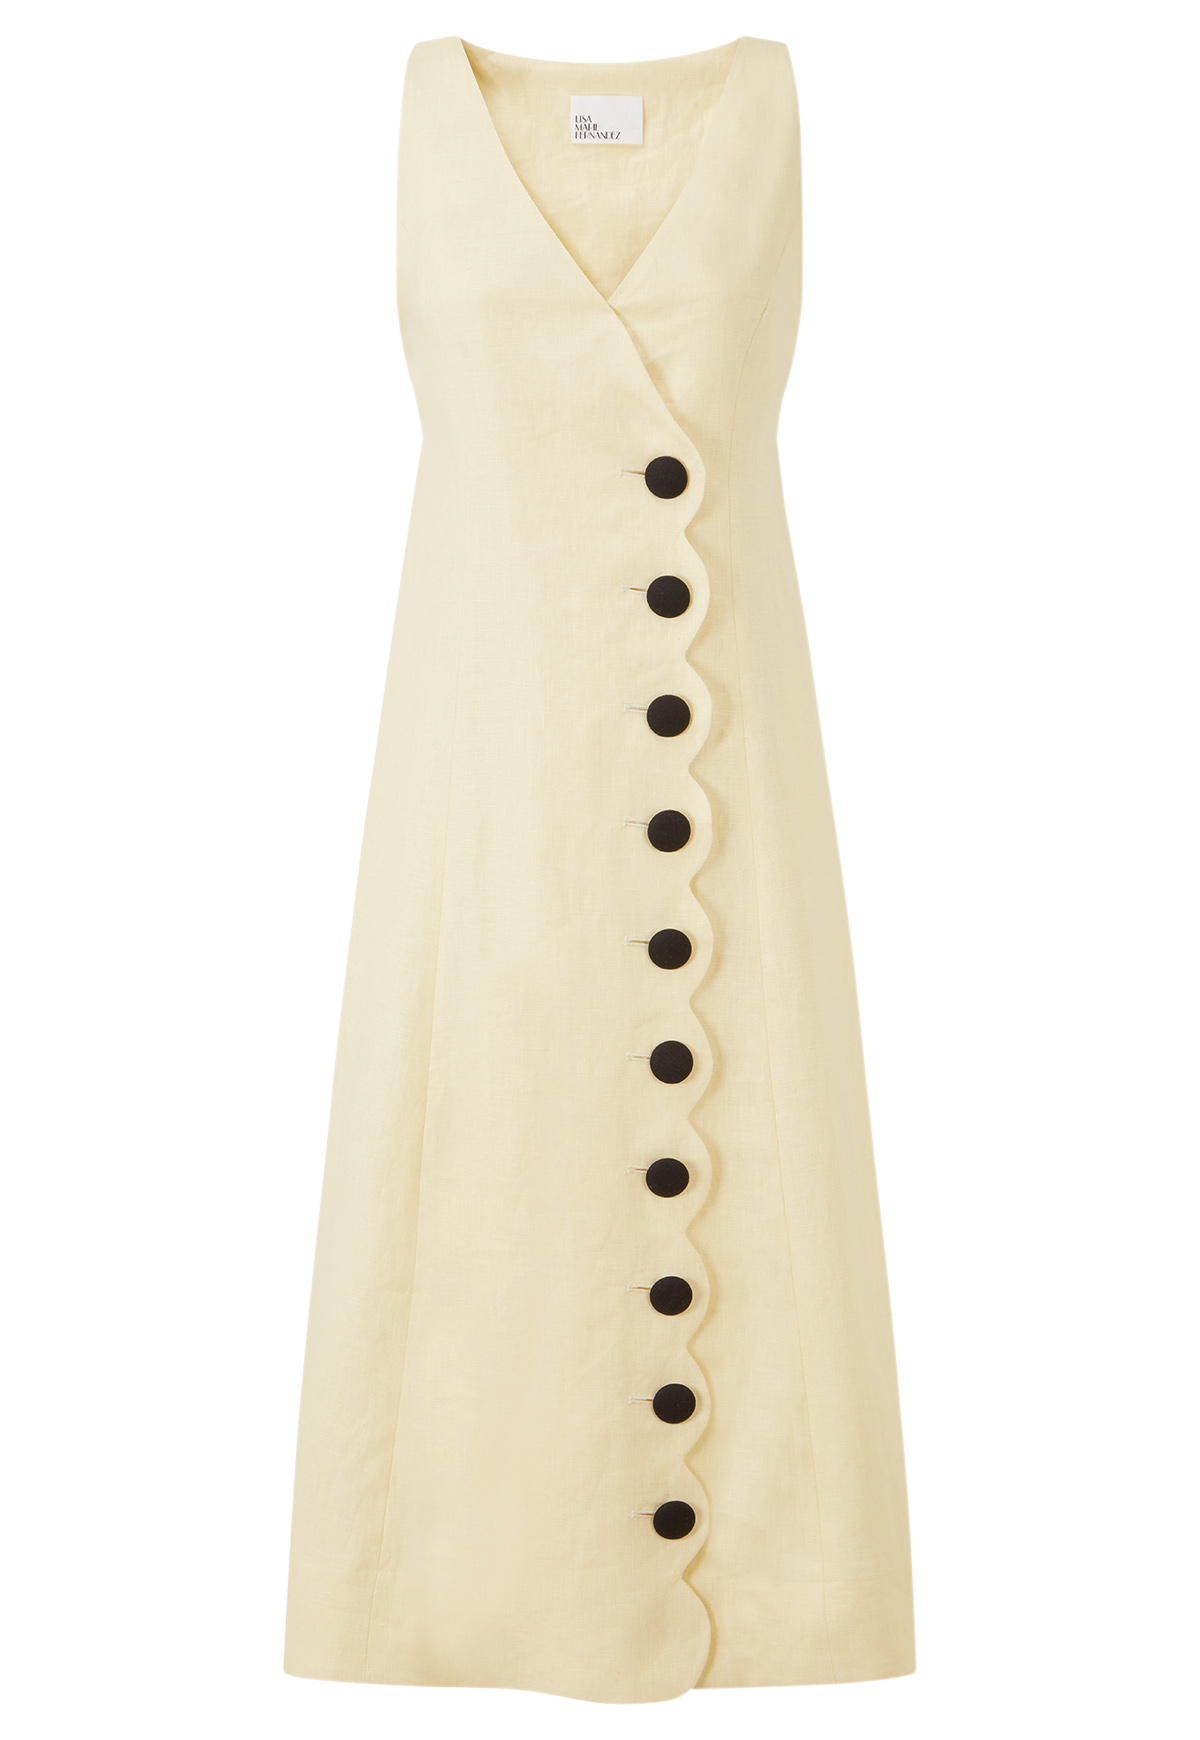 THE SCALLOP WRAP DRESS in BUTTER YELLOW LINEN